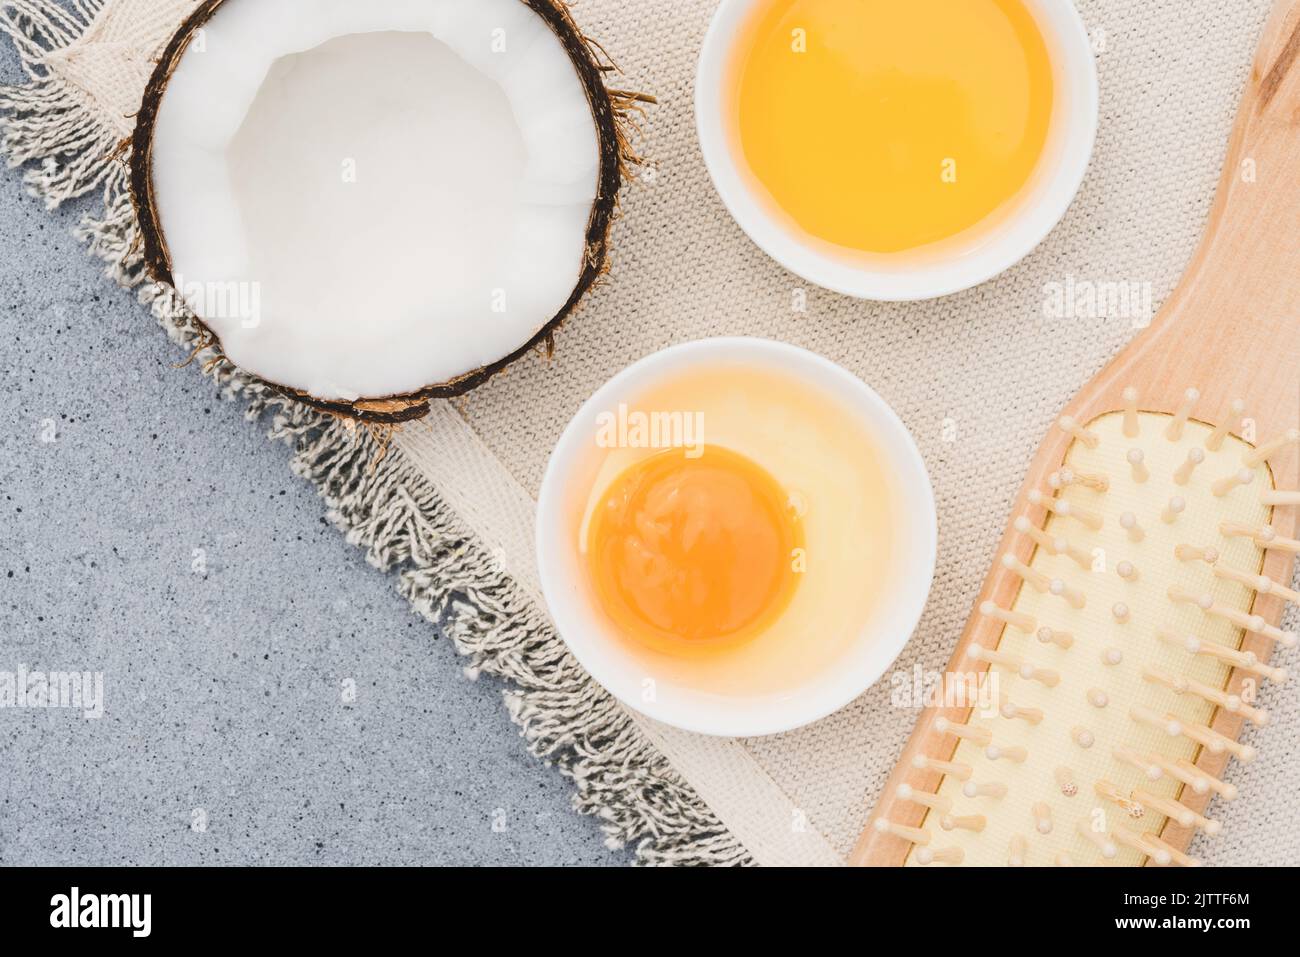 Making homemade hair mask with natural ingredients - egg yolk, honey and  coconut oil. Natural hair beauty treatment. Zero waste handmade cosmetics  Stock Photo - Alamy